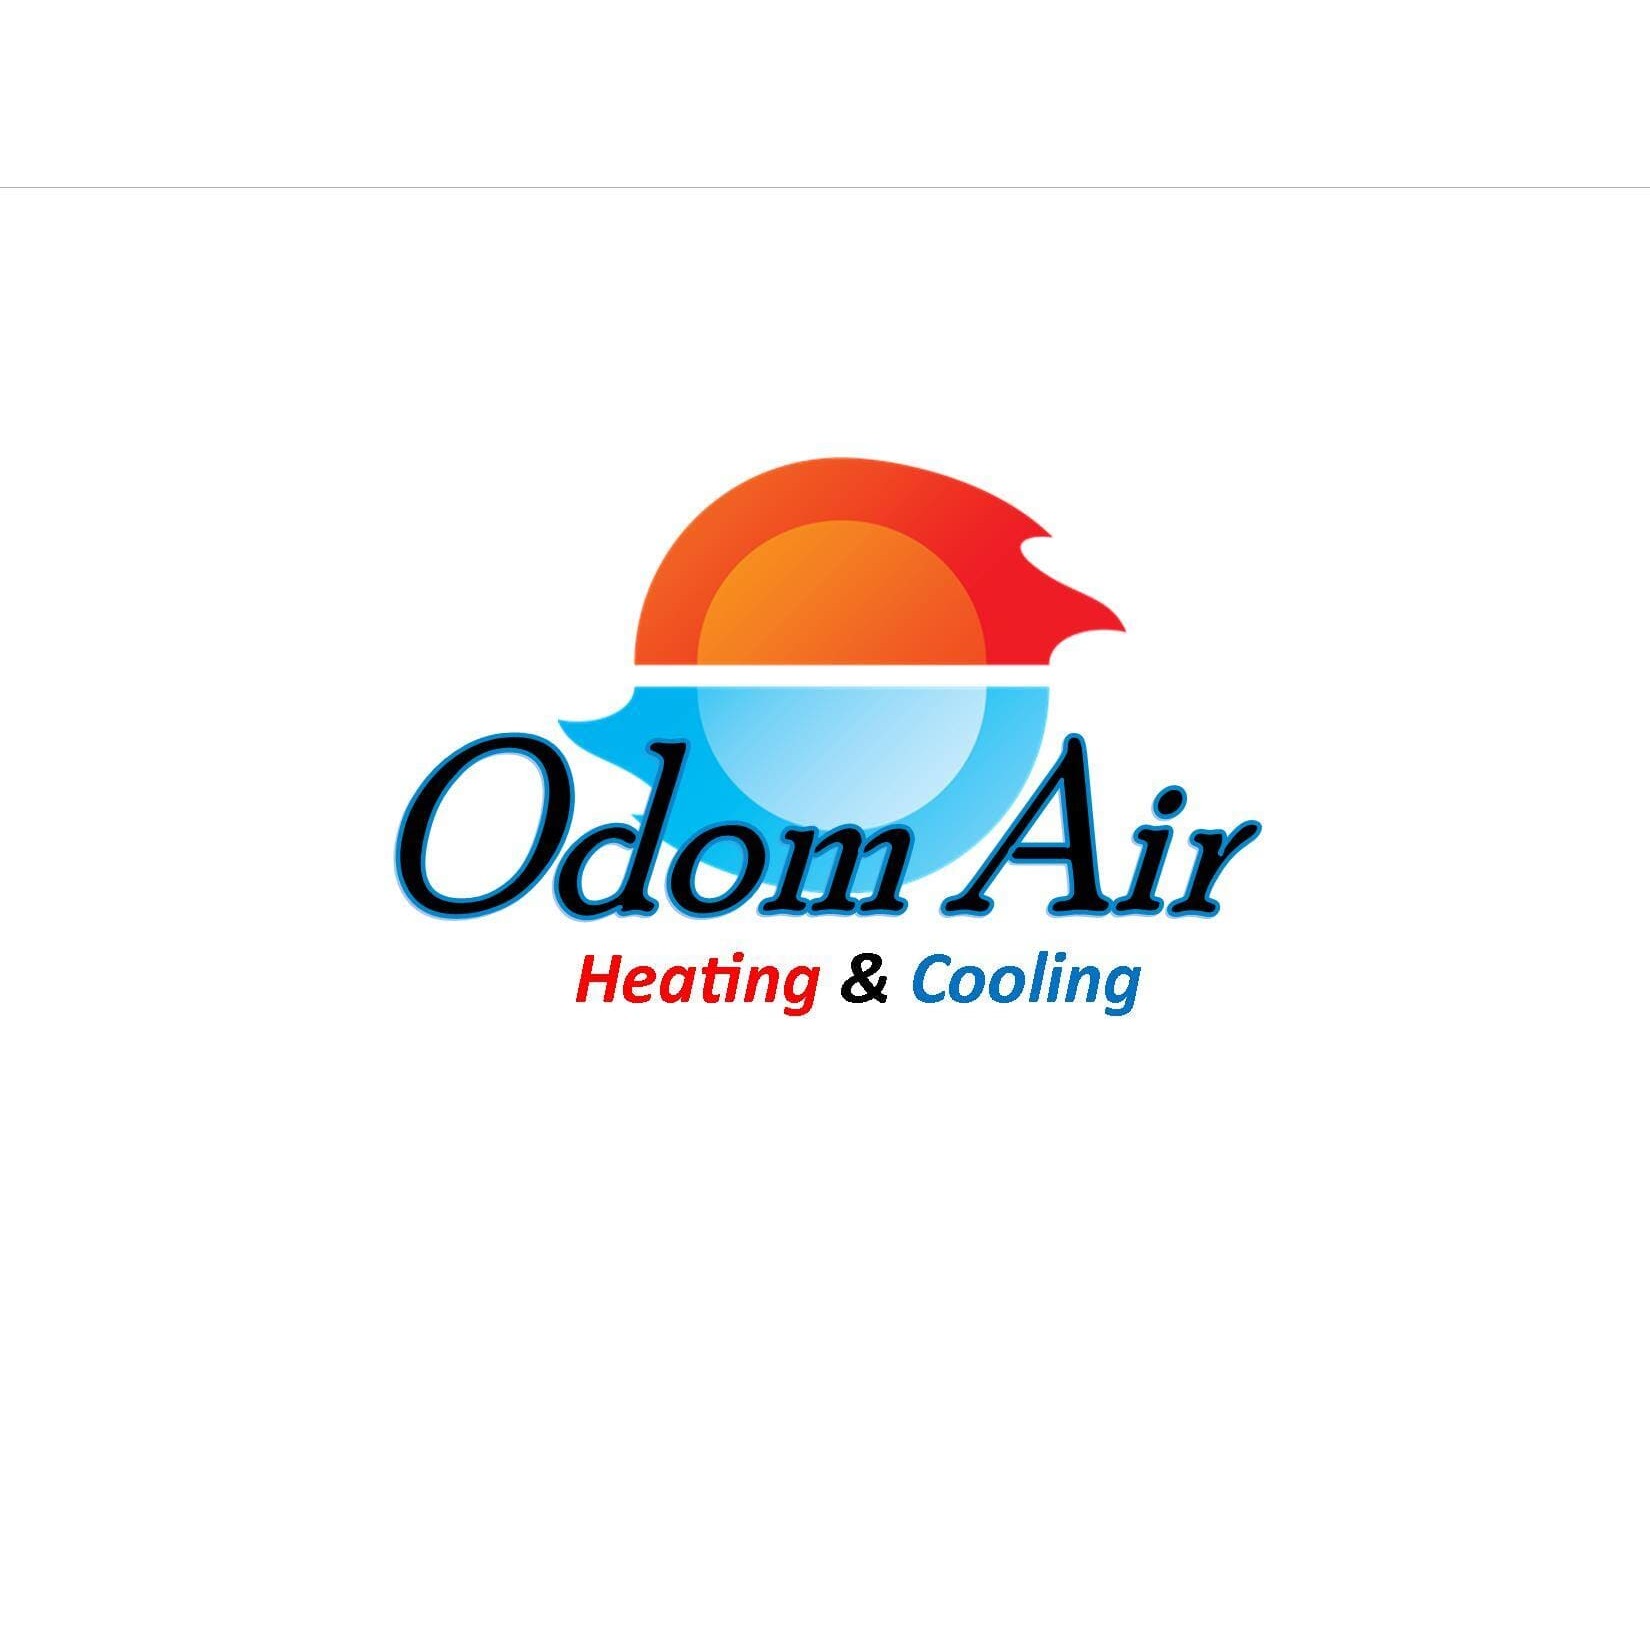 Odom Air Heating & Cooling - Moyock, NC 27958 - (757)618-0633 | ShowMeLocal.com